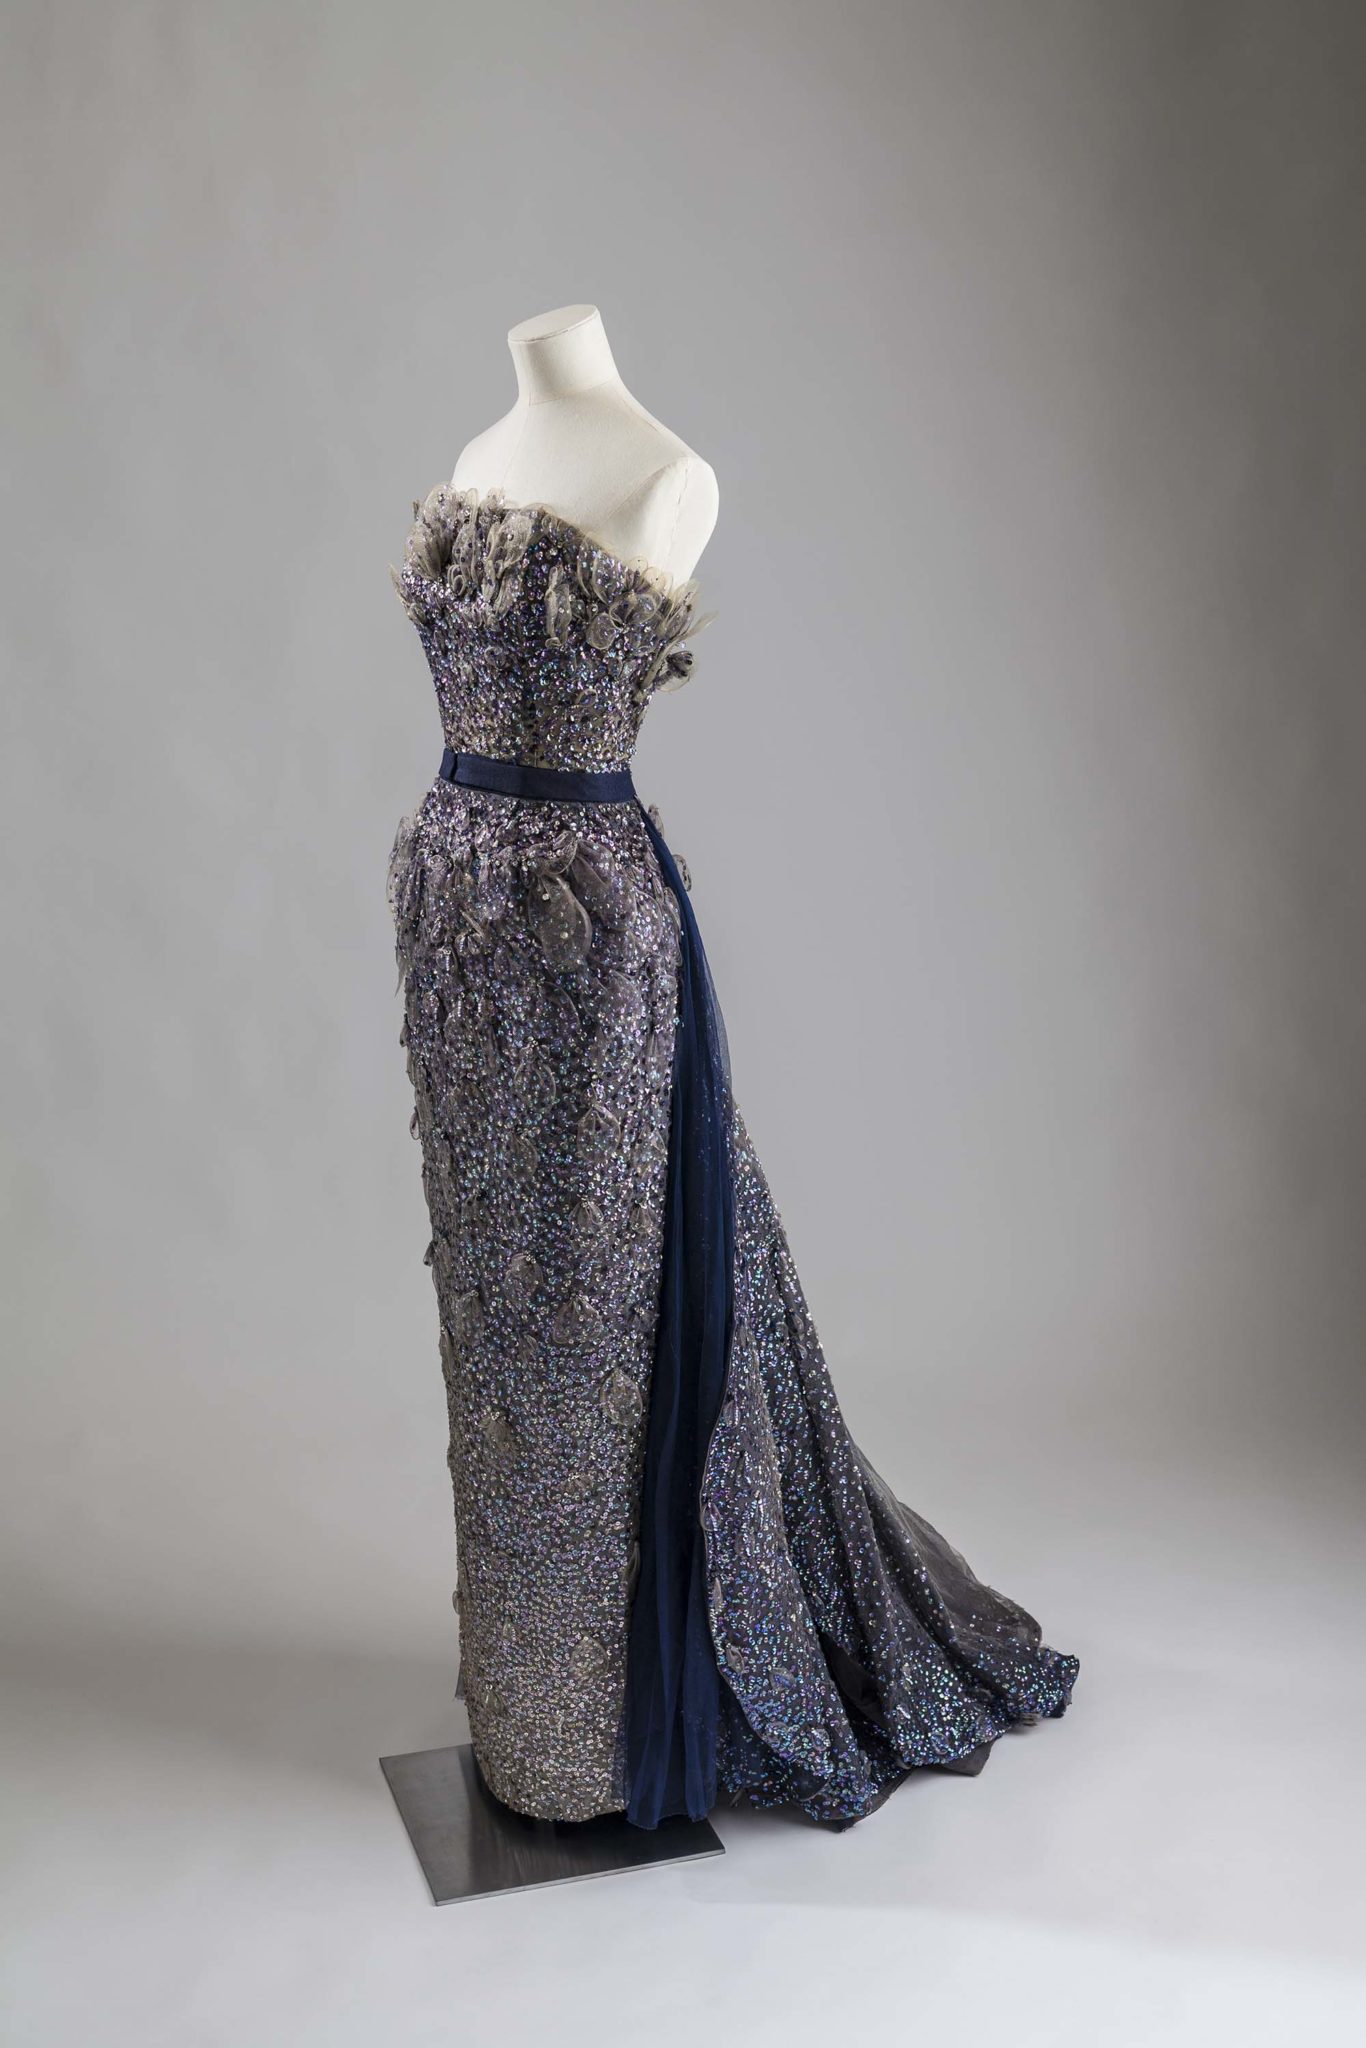 Christian Dior Ball Gown in black tulle and satin appliqué N 363404 Circa  1955 at 1stDibs